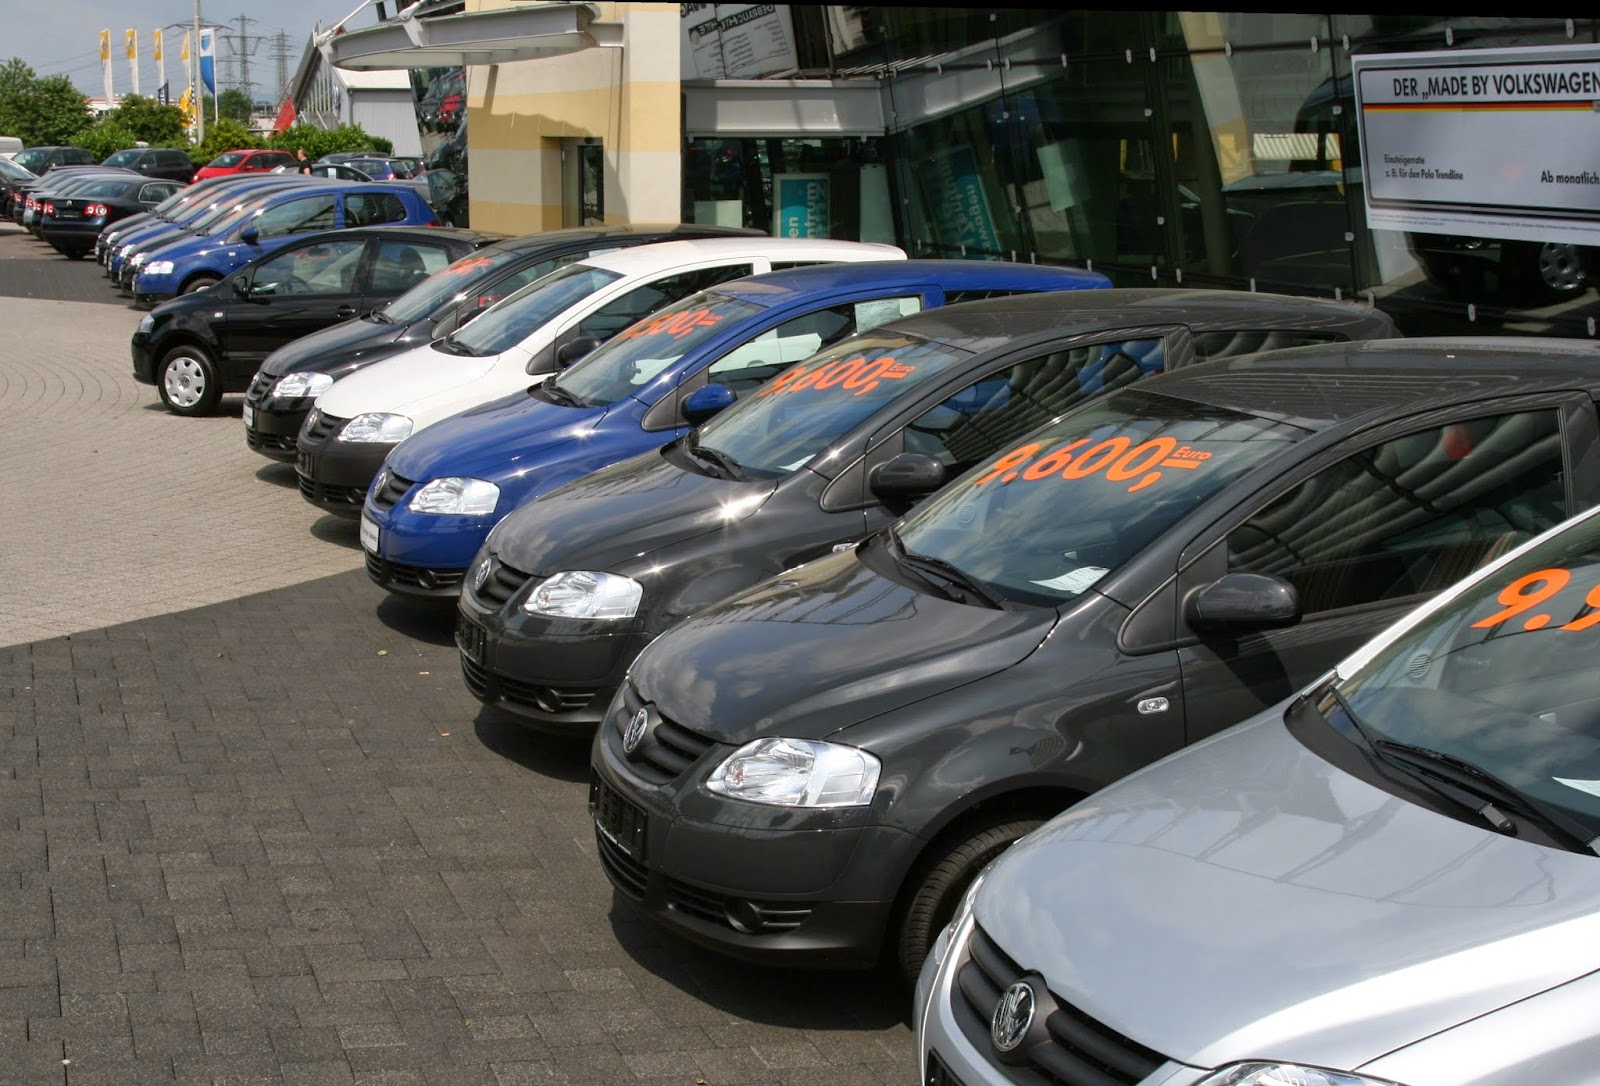 The Ultimate Guide to Buying Used Cars: Tips and Tricks